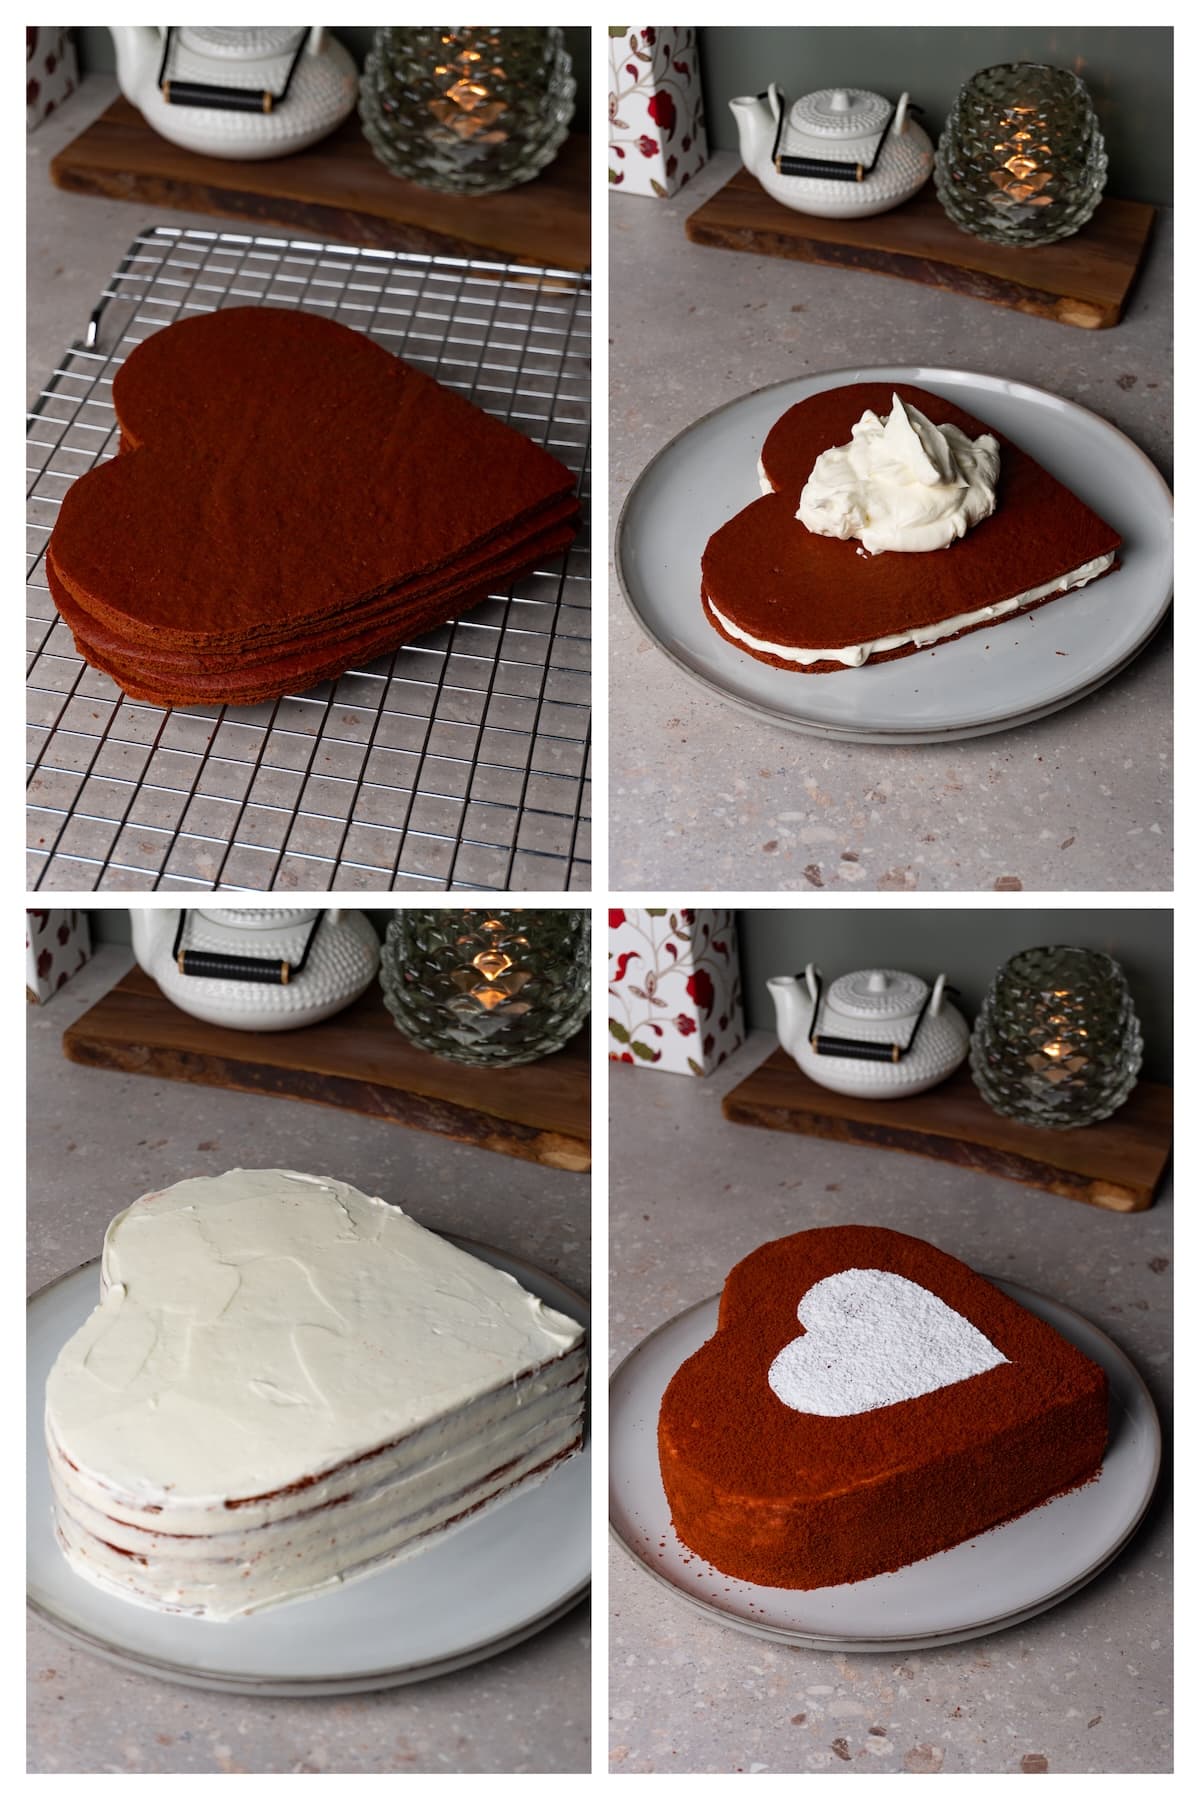 A collage image shows how to make assemble red velvet heart shaped cake with cream cheese frosting in 4 steps.